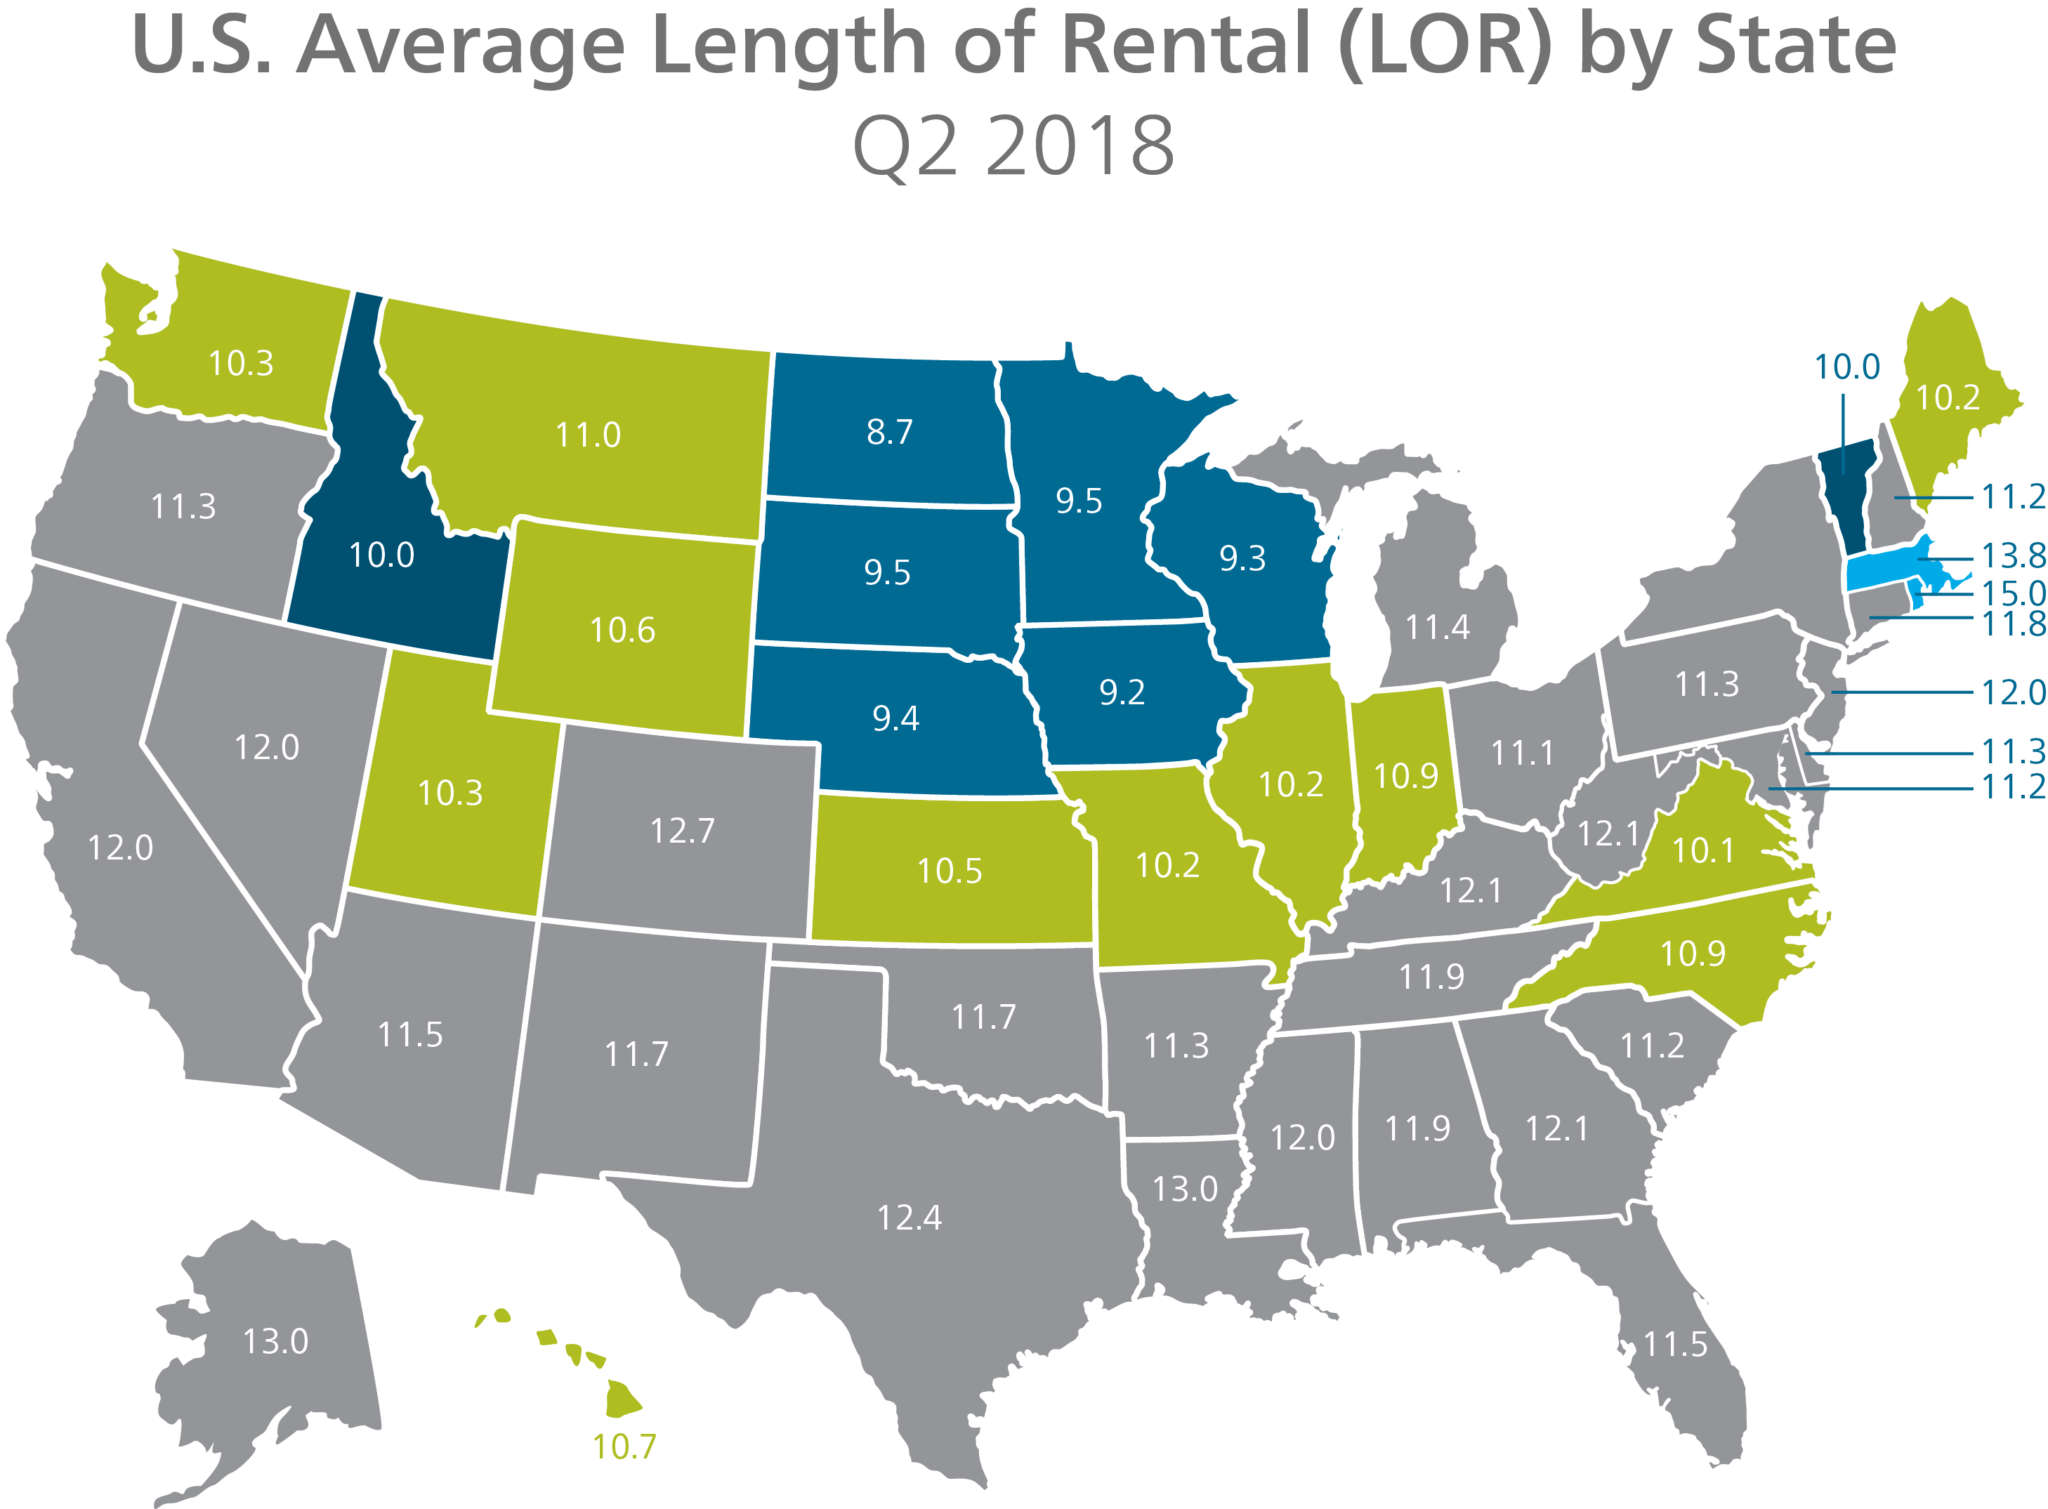 U.S. Average Length of Rental by State